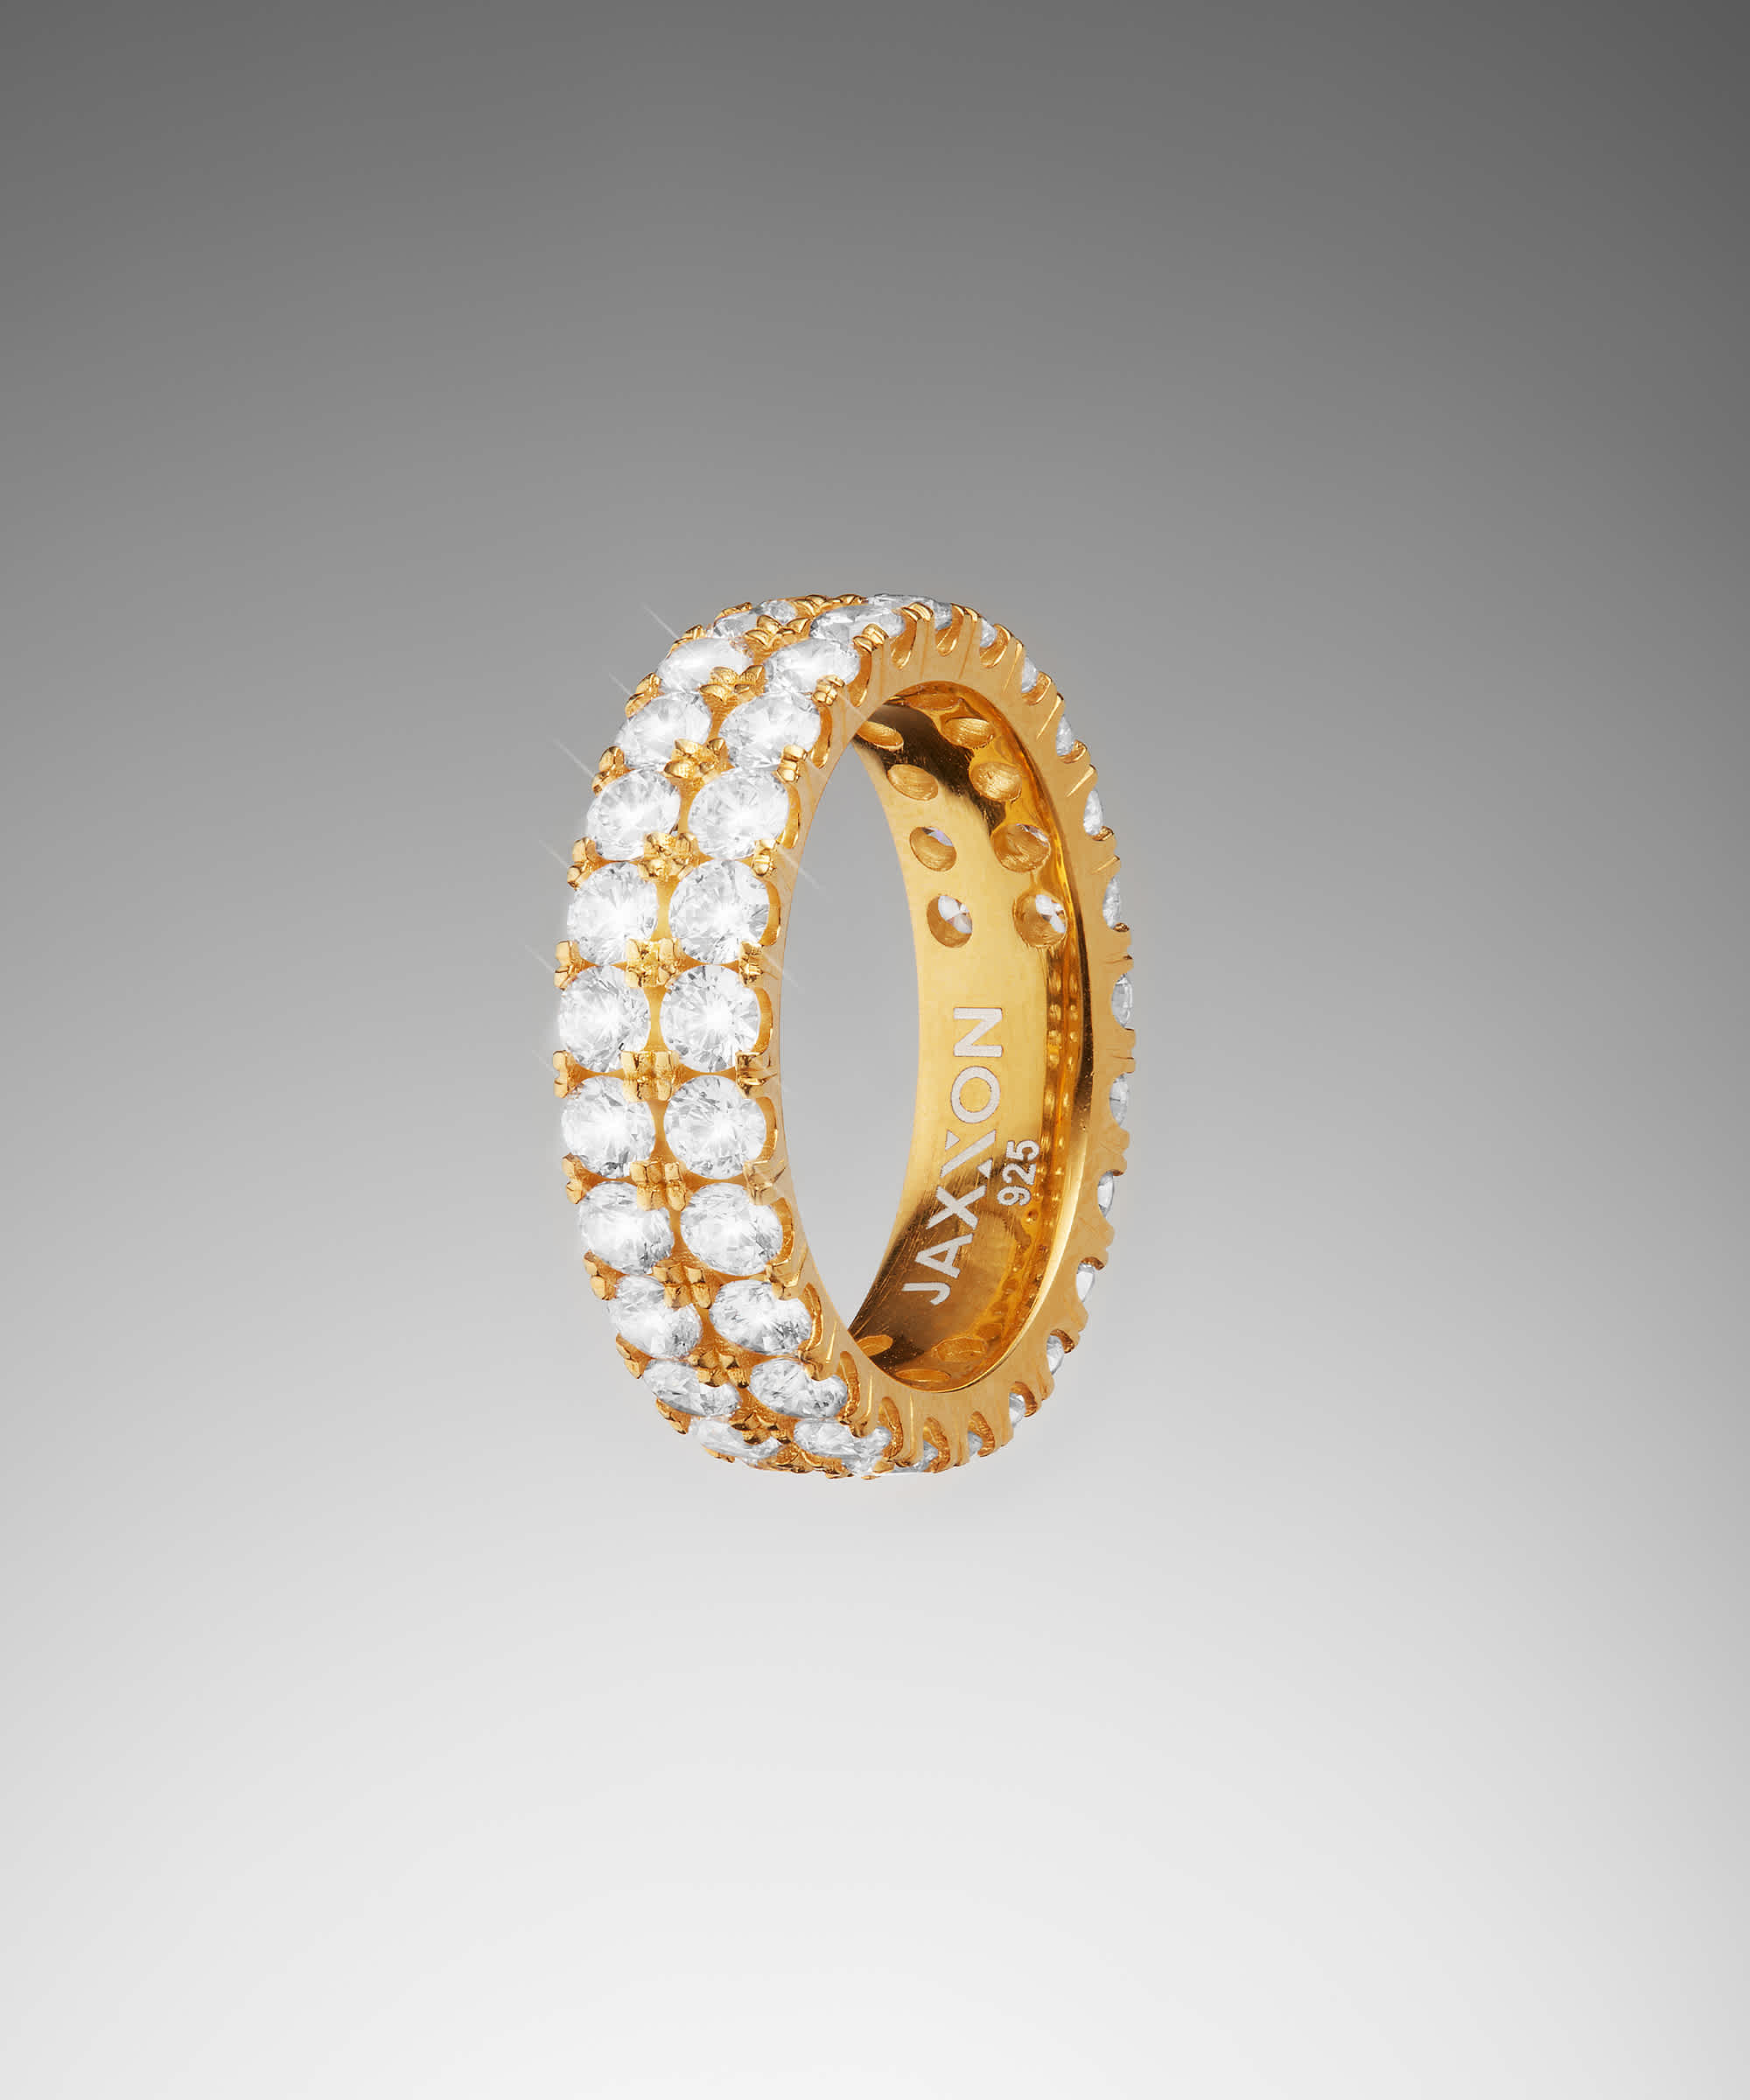 ATTENTION TO DETAIL - Eternity Bands